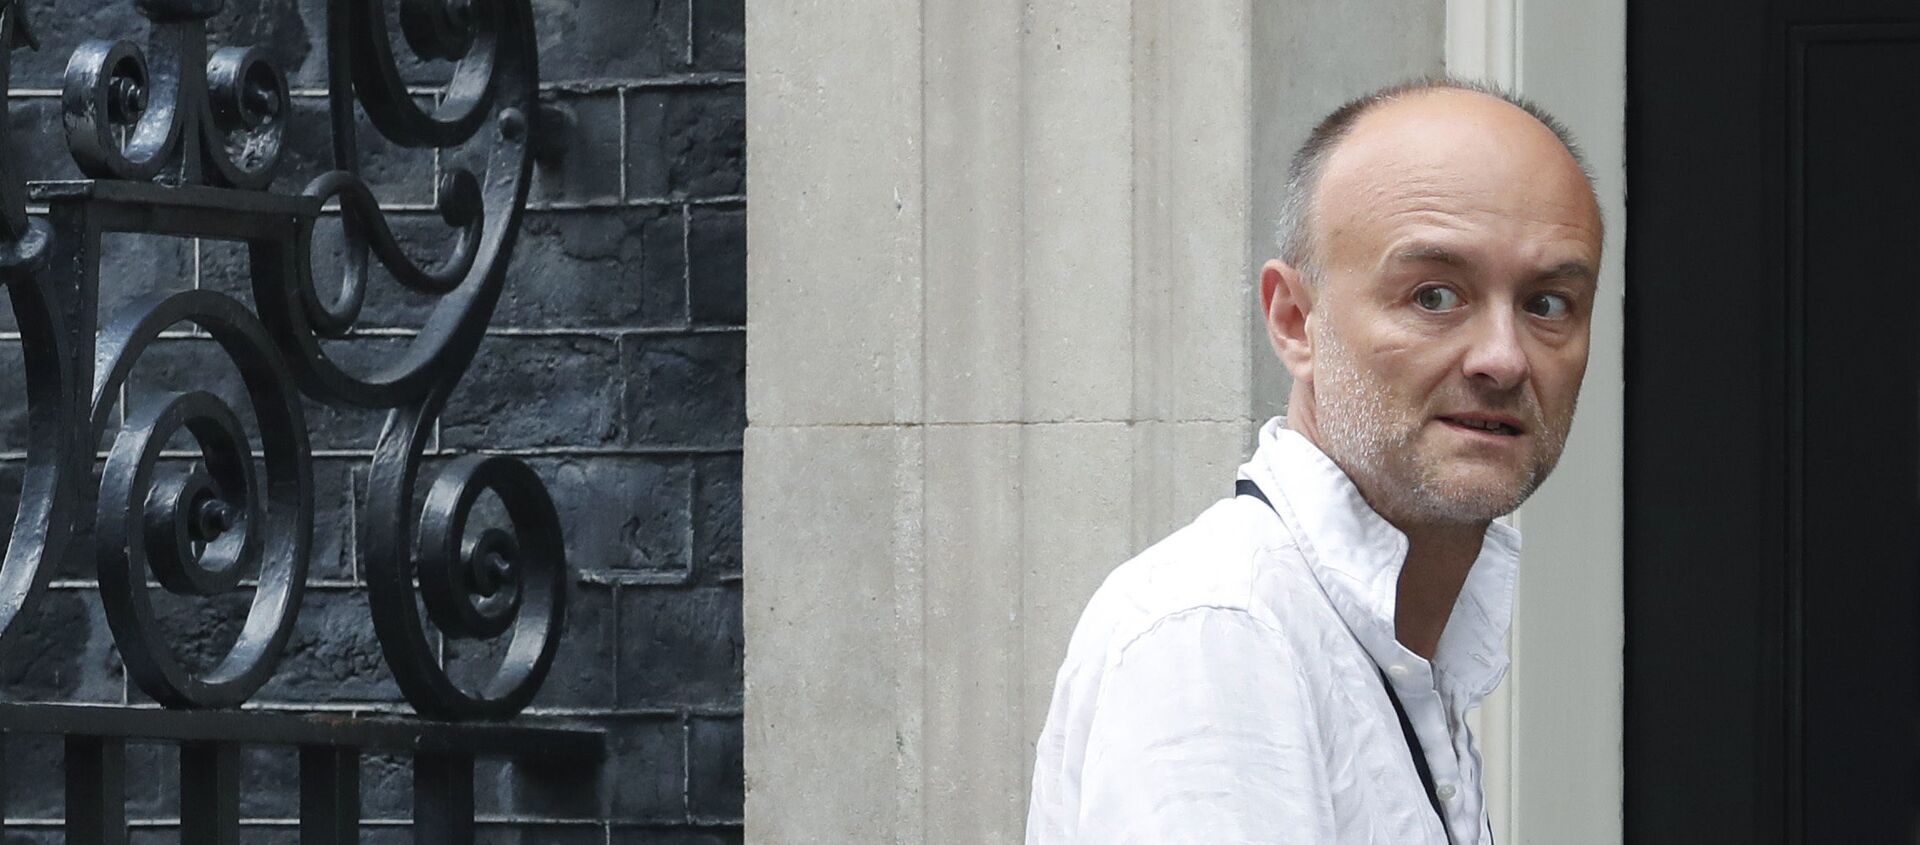 Dominic Cummings, a British political strategist and special adviser to Prime Minister Boris Johnson, slinks into 10 Downing Street in London, Tuesday, July 30, 2019. (AP Photo/Alastair Grant) - Sputnik International, 1920, 27.04.2021